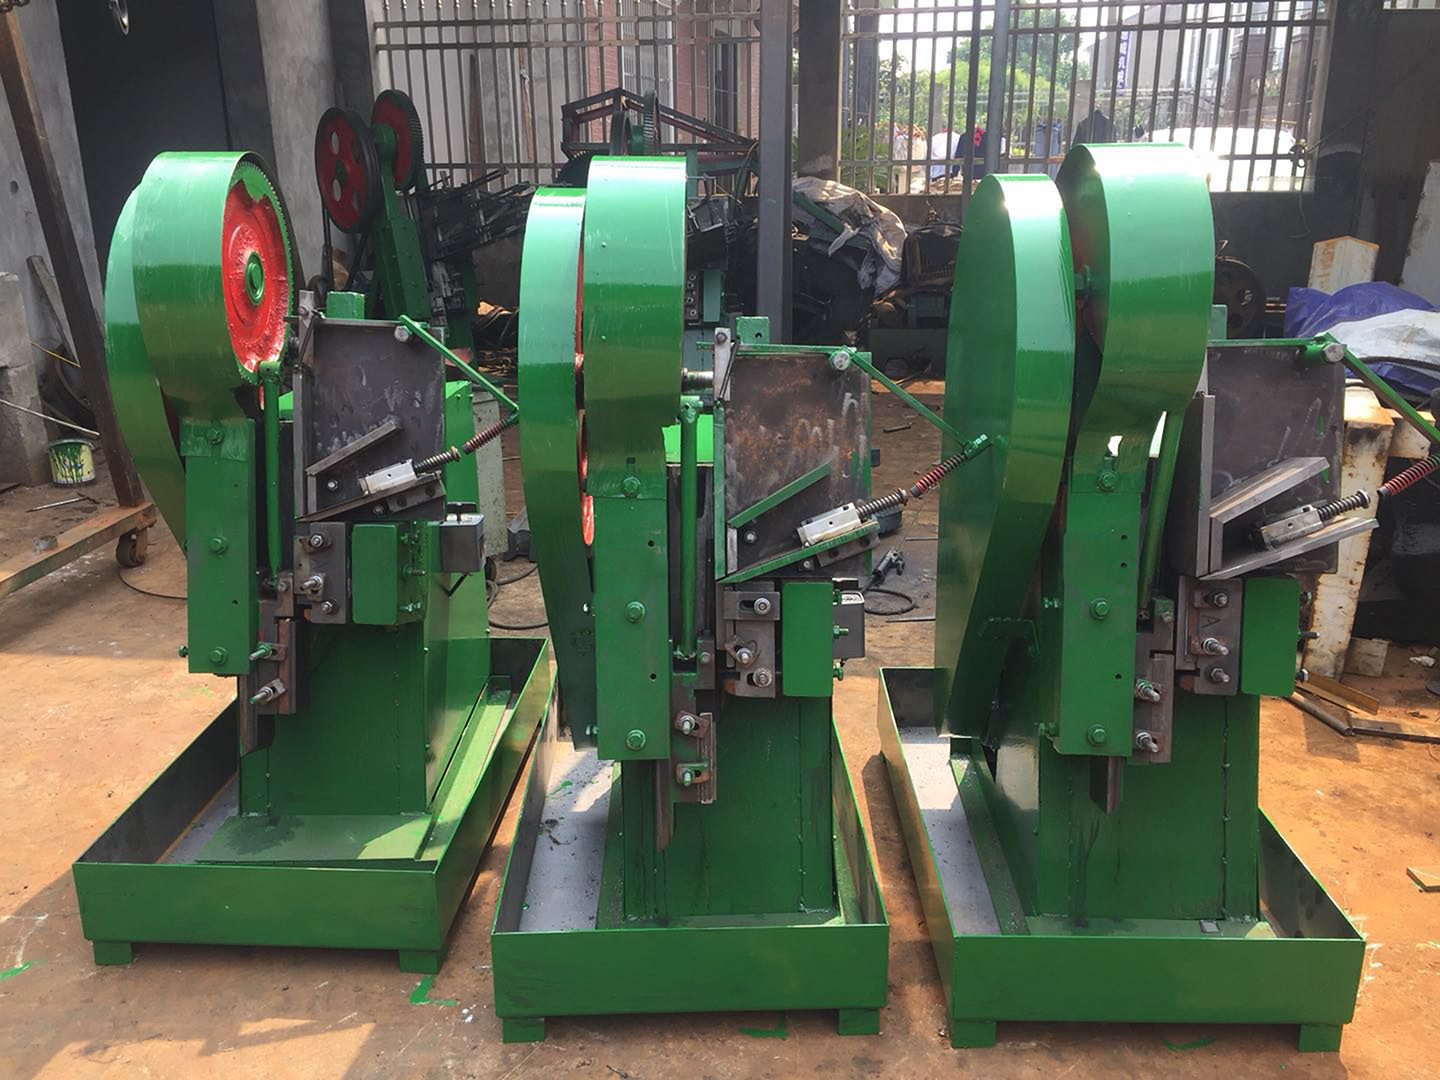 3 sets vertical thread rolling machines waiting for shipping